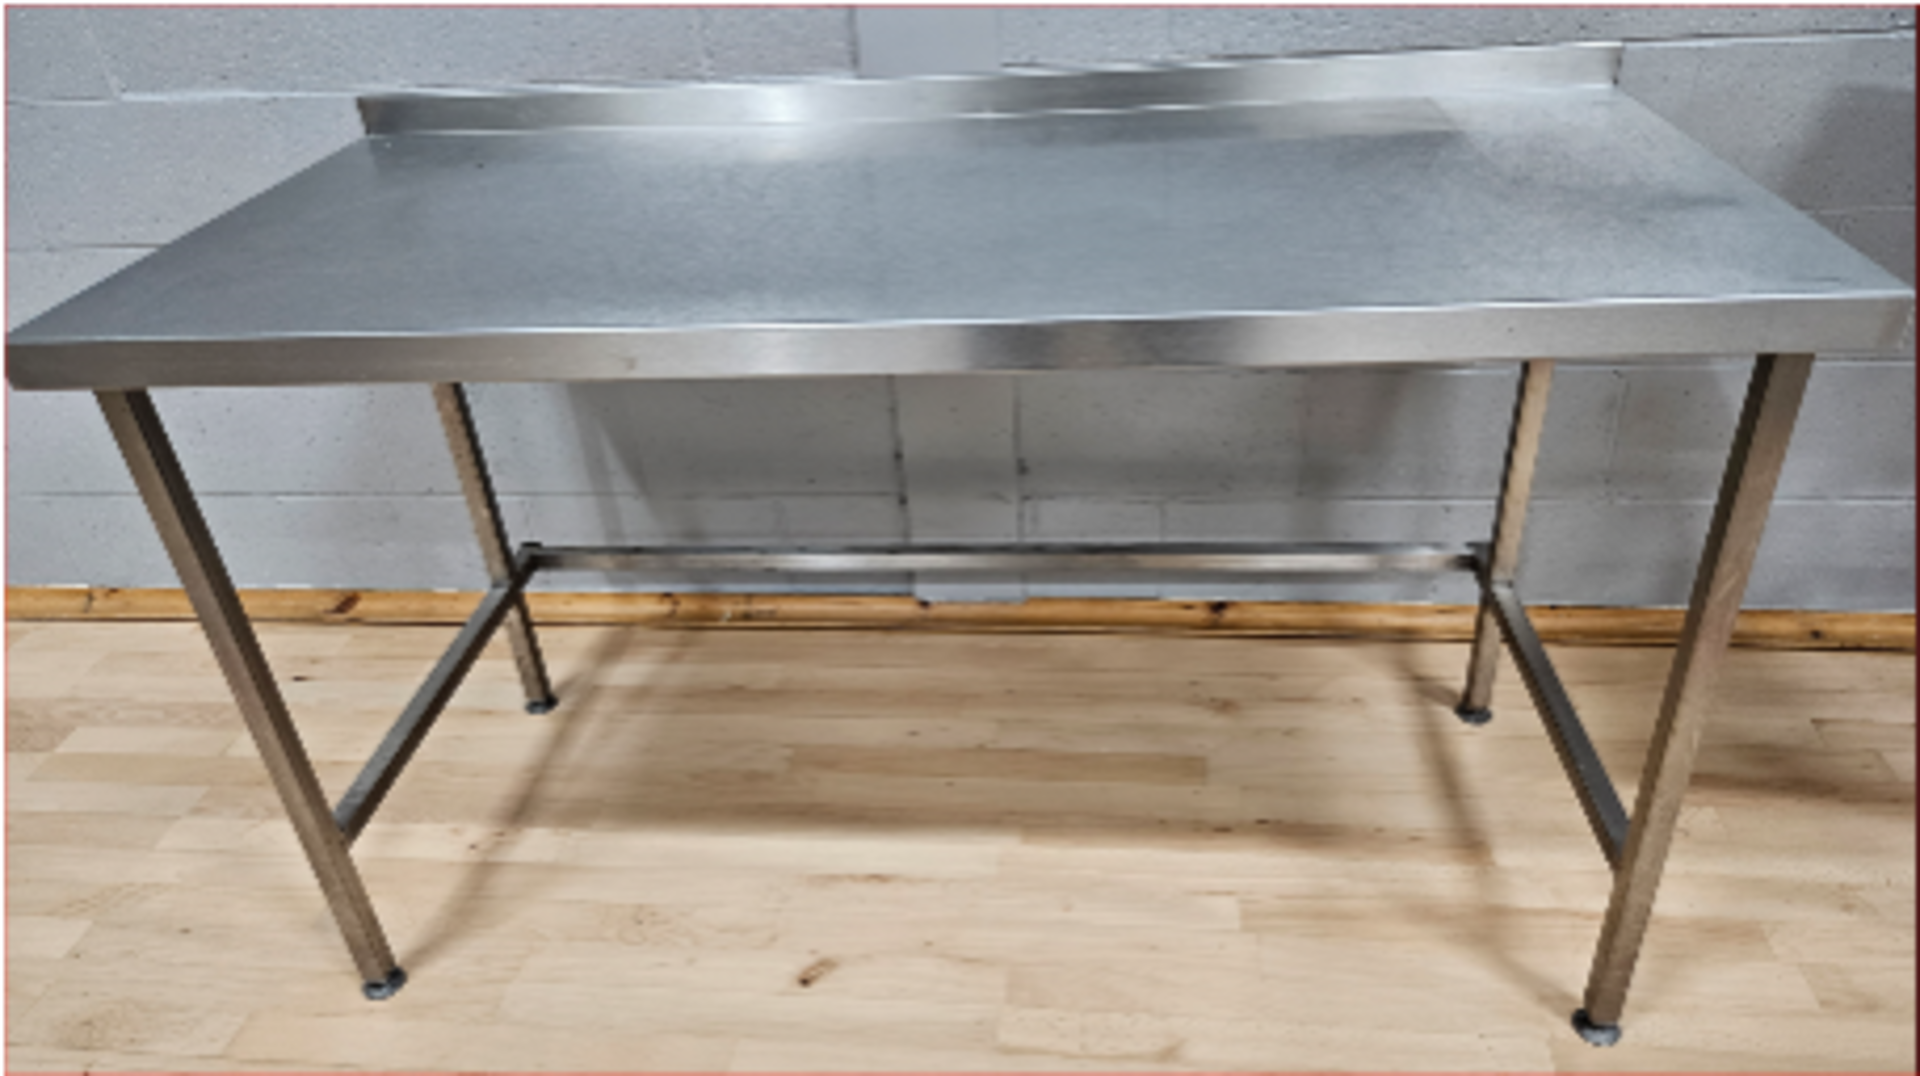 Stainless Steel Catering Table 1600 x 700 x 900